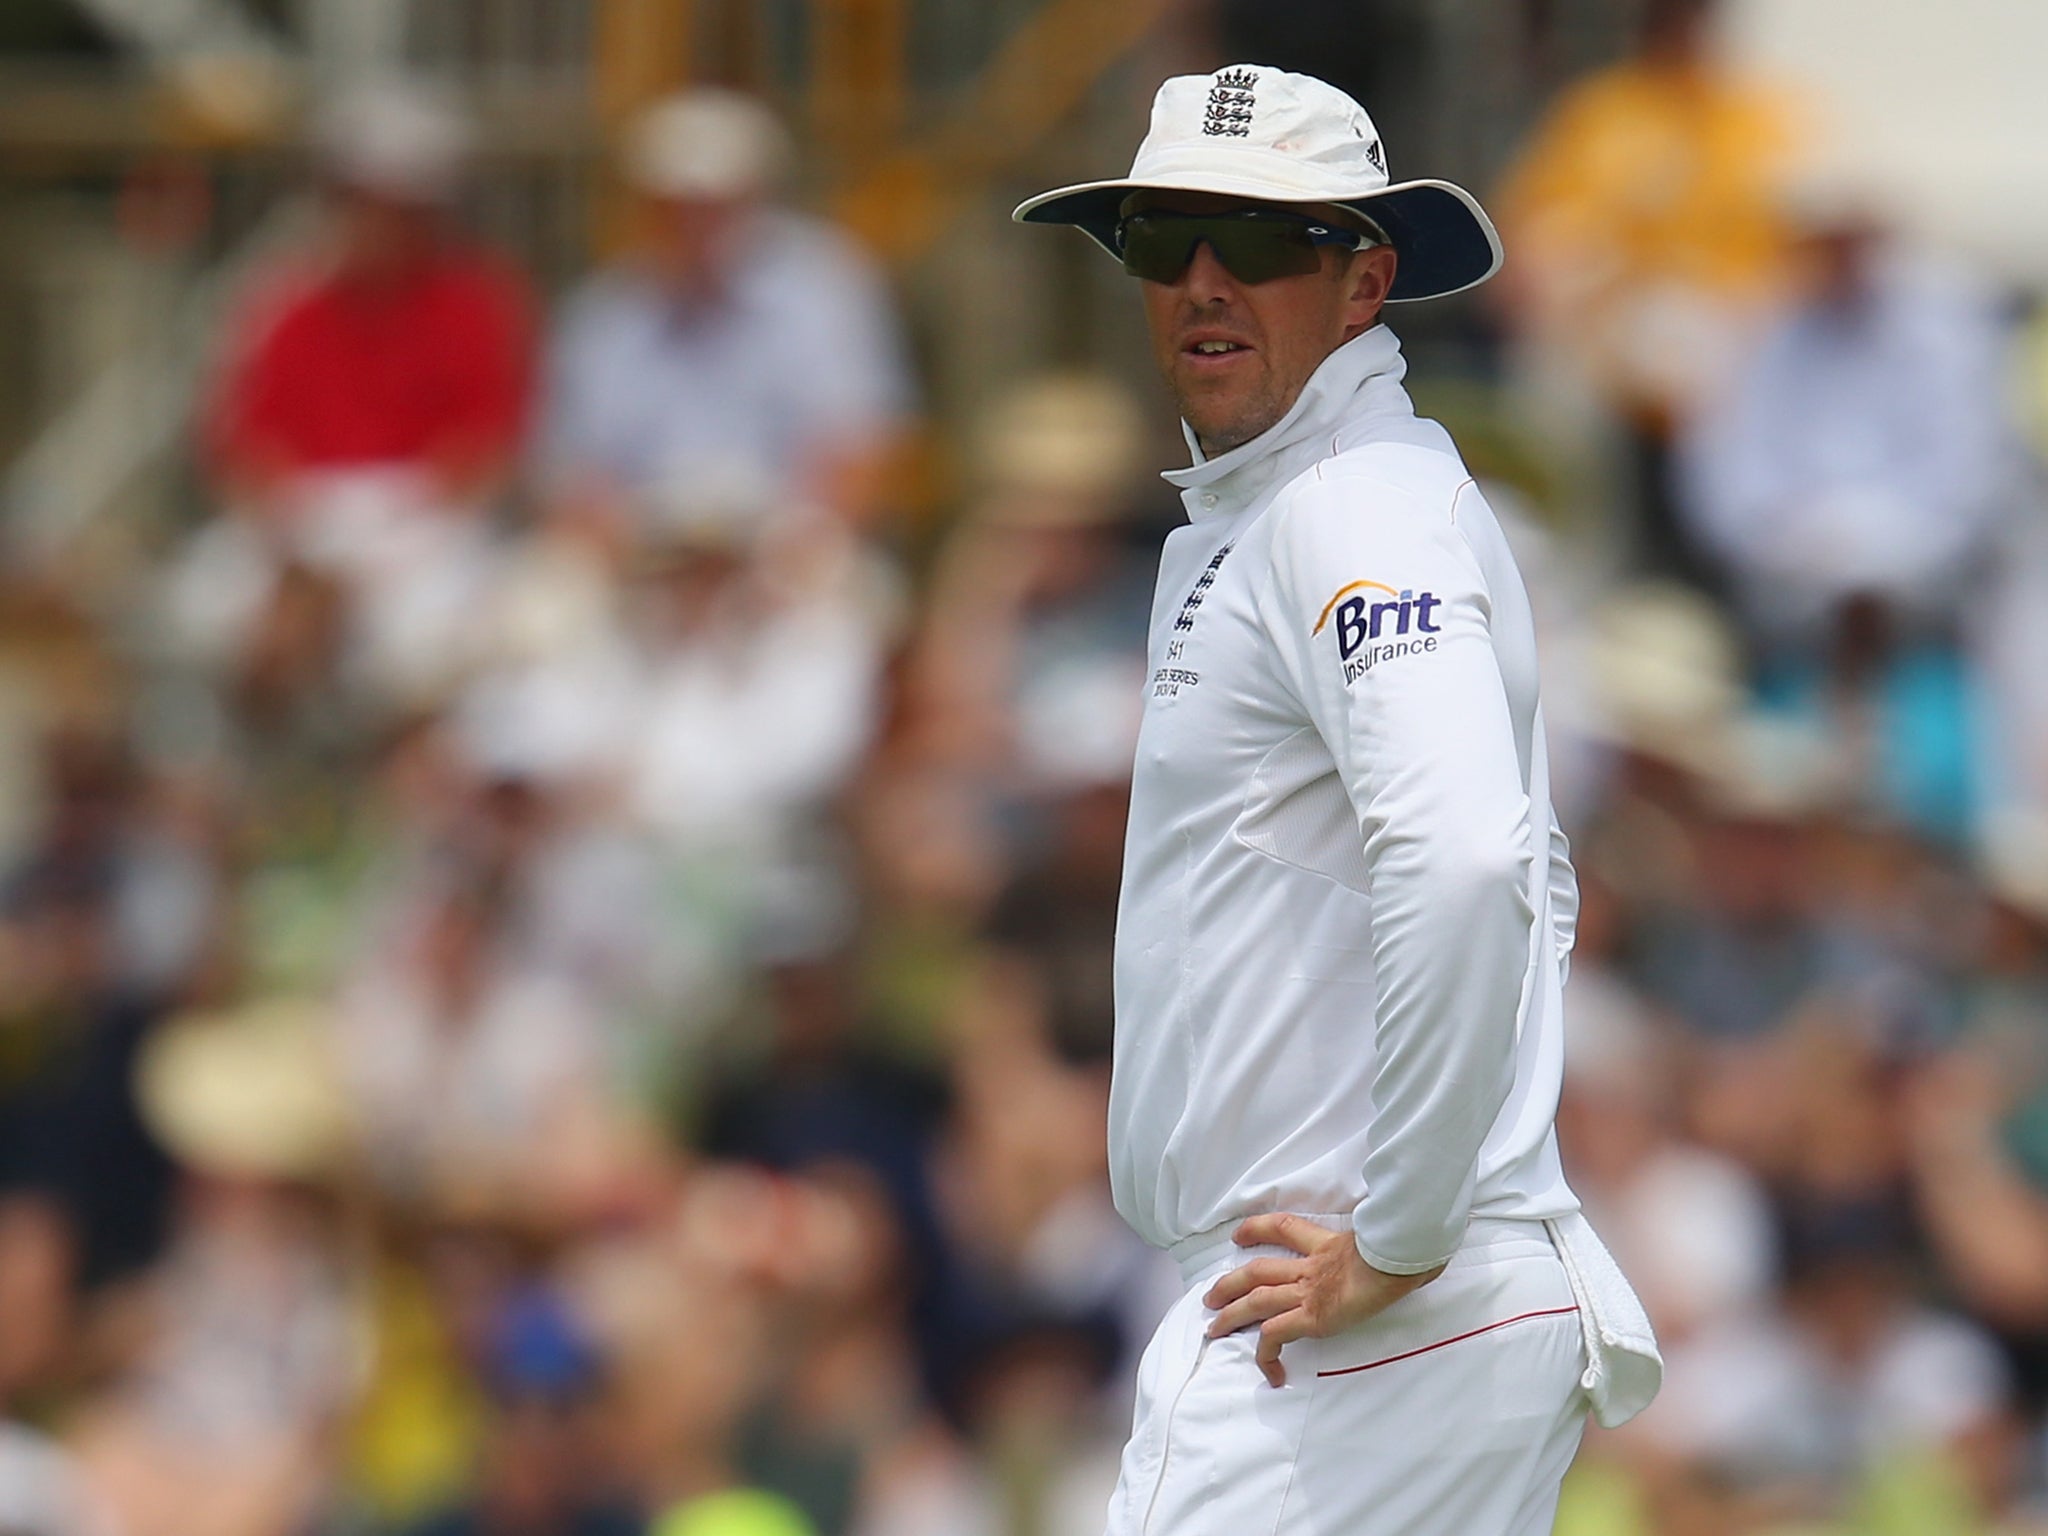 Graeme Swann announced his retirement following the third Ashes Test and England team director Andy Flower has admitted he regrets Swann's decision